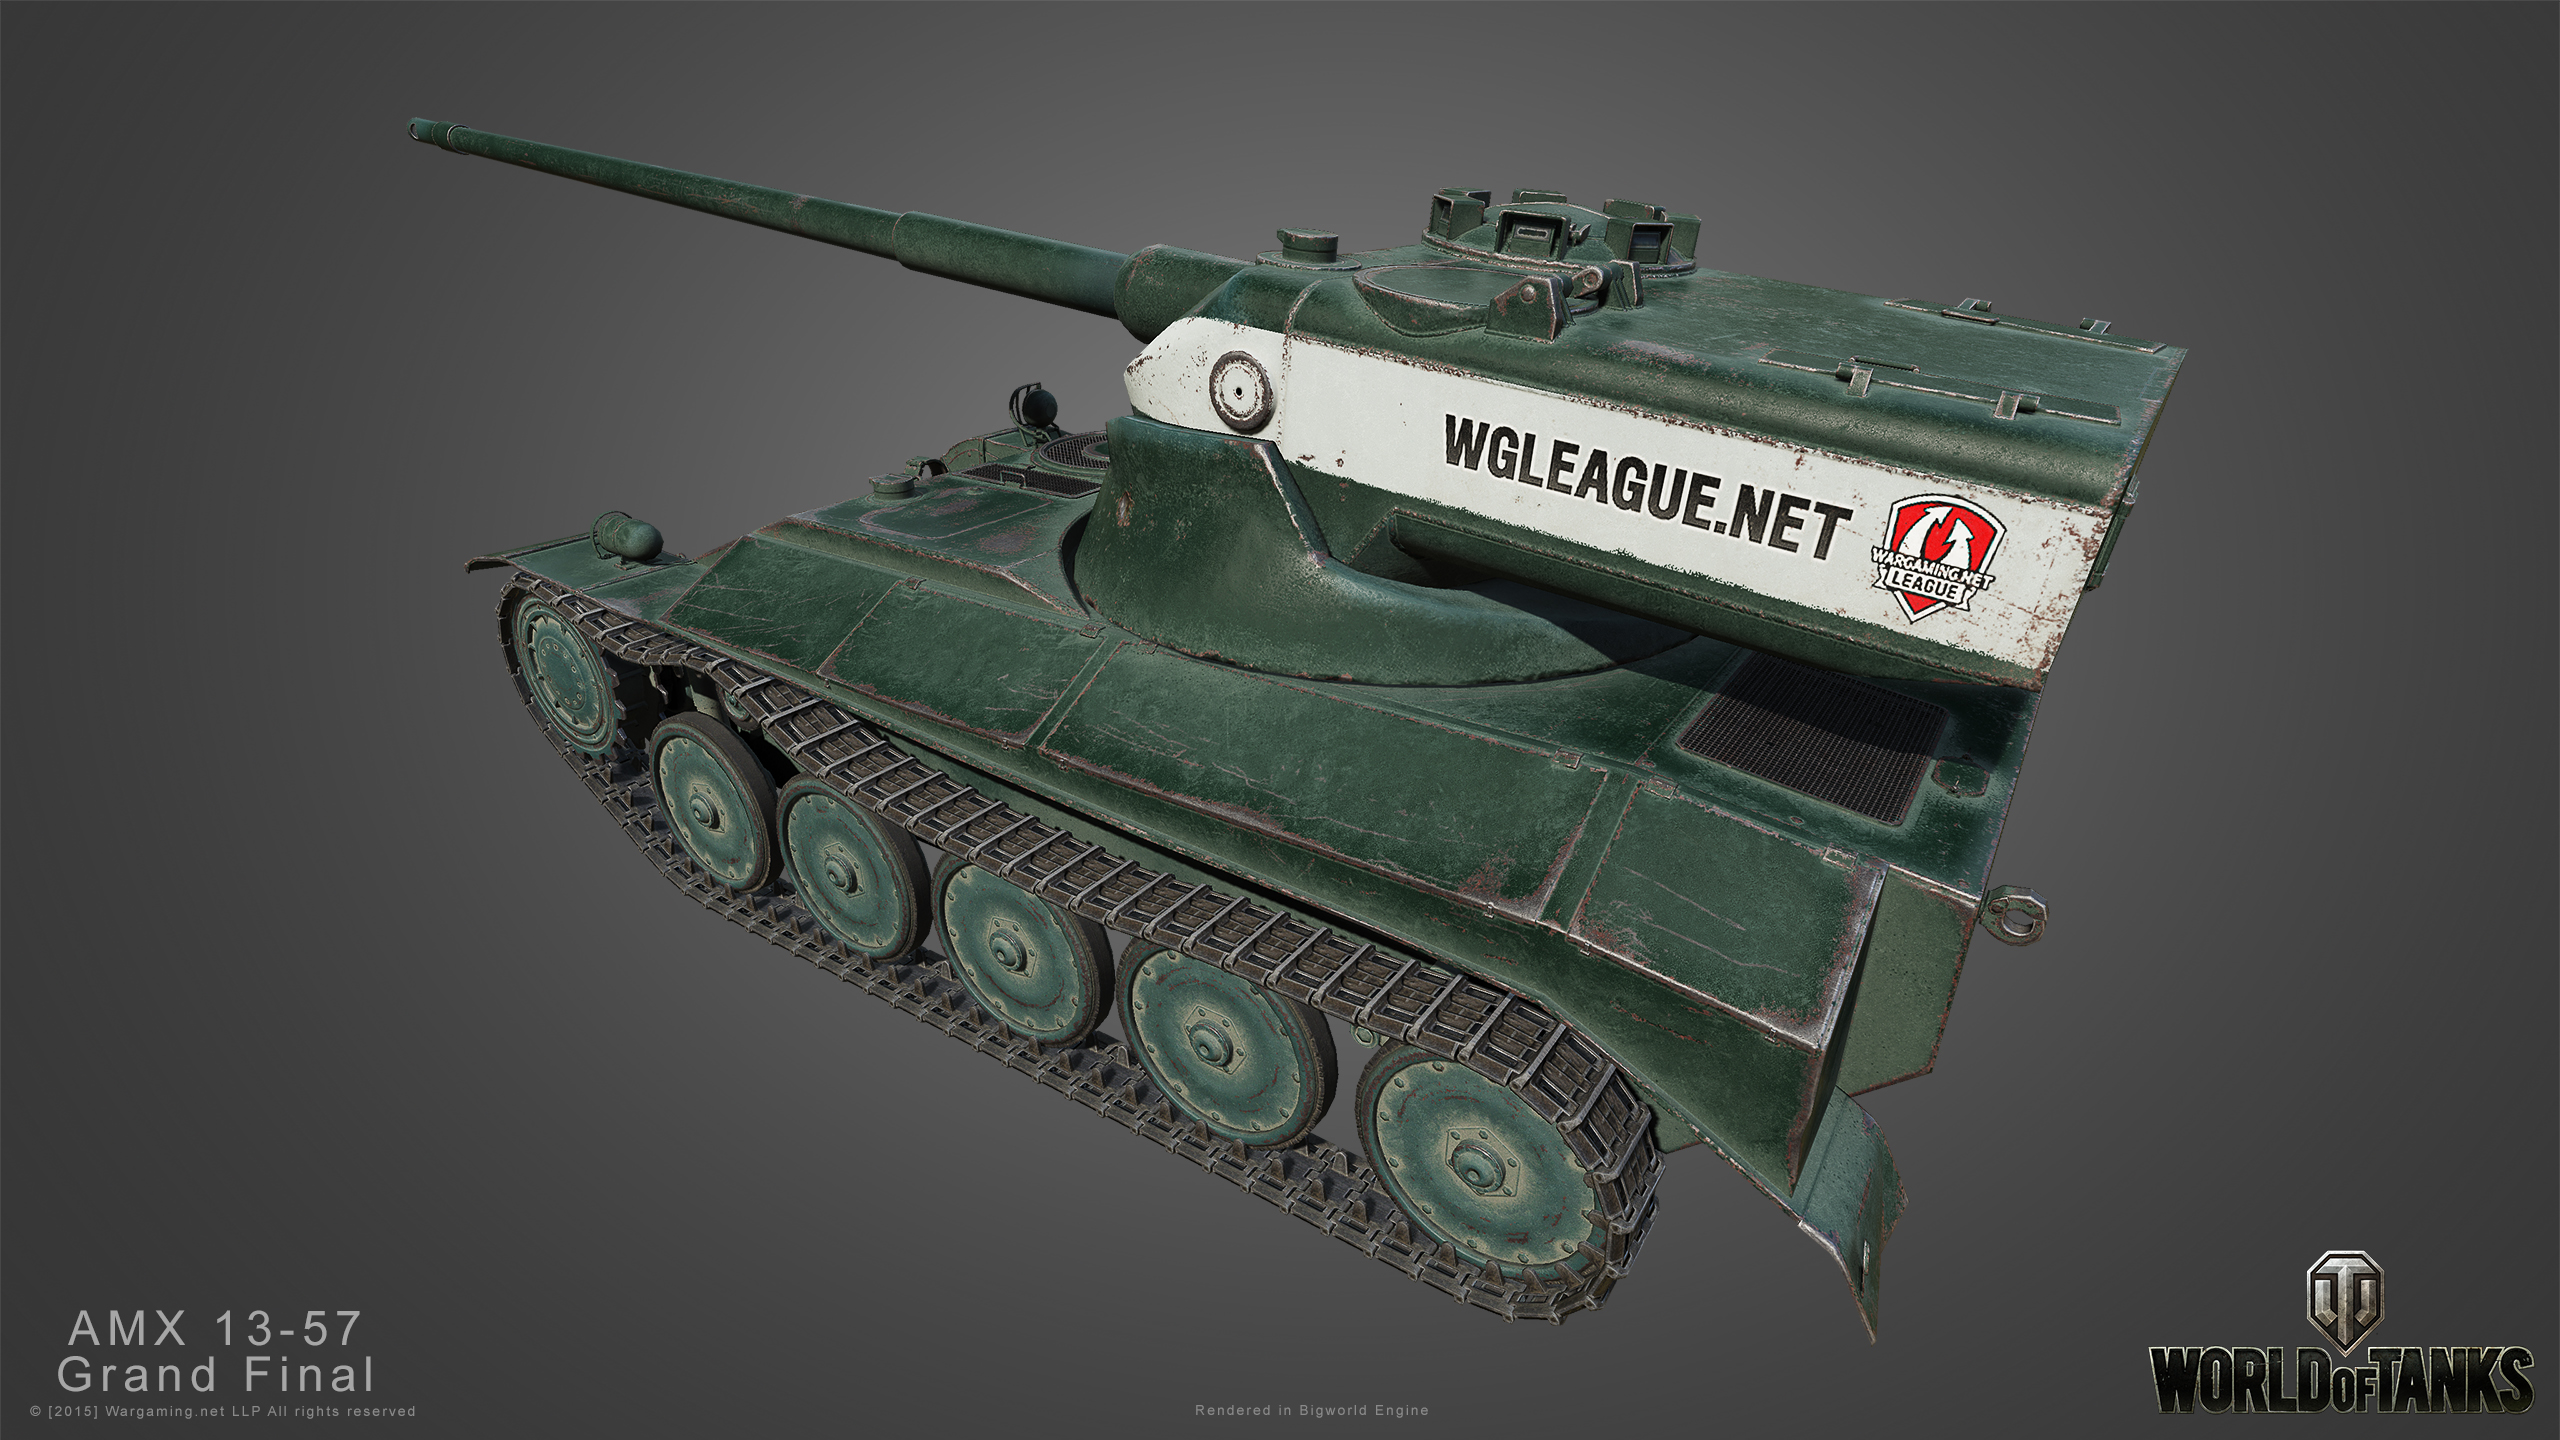 The Grand Finals Exclusive Amx 13 57 Tank General News World Of Tanks